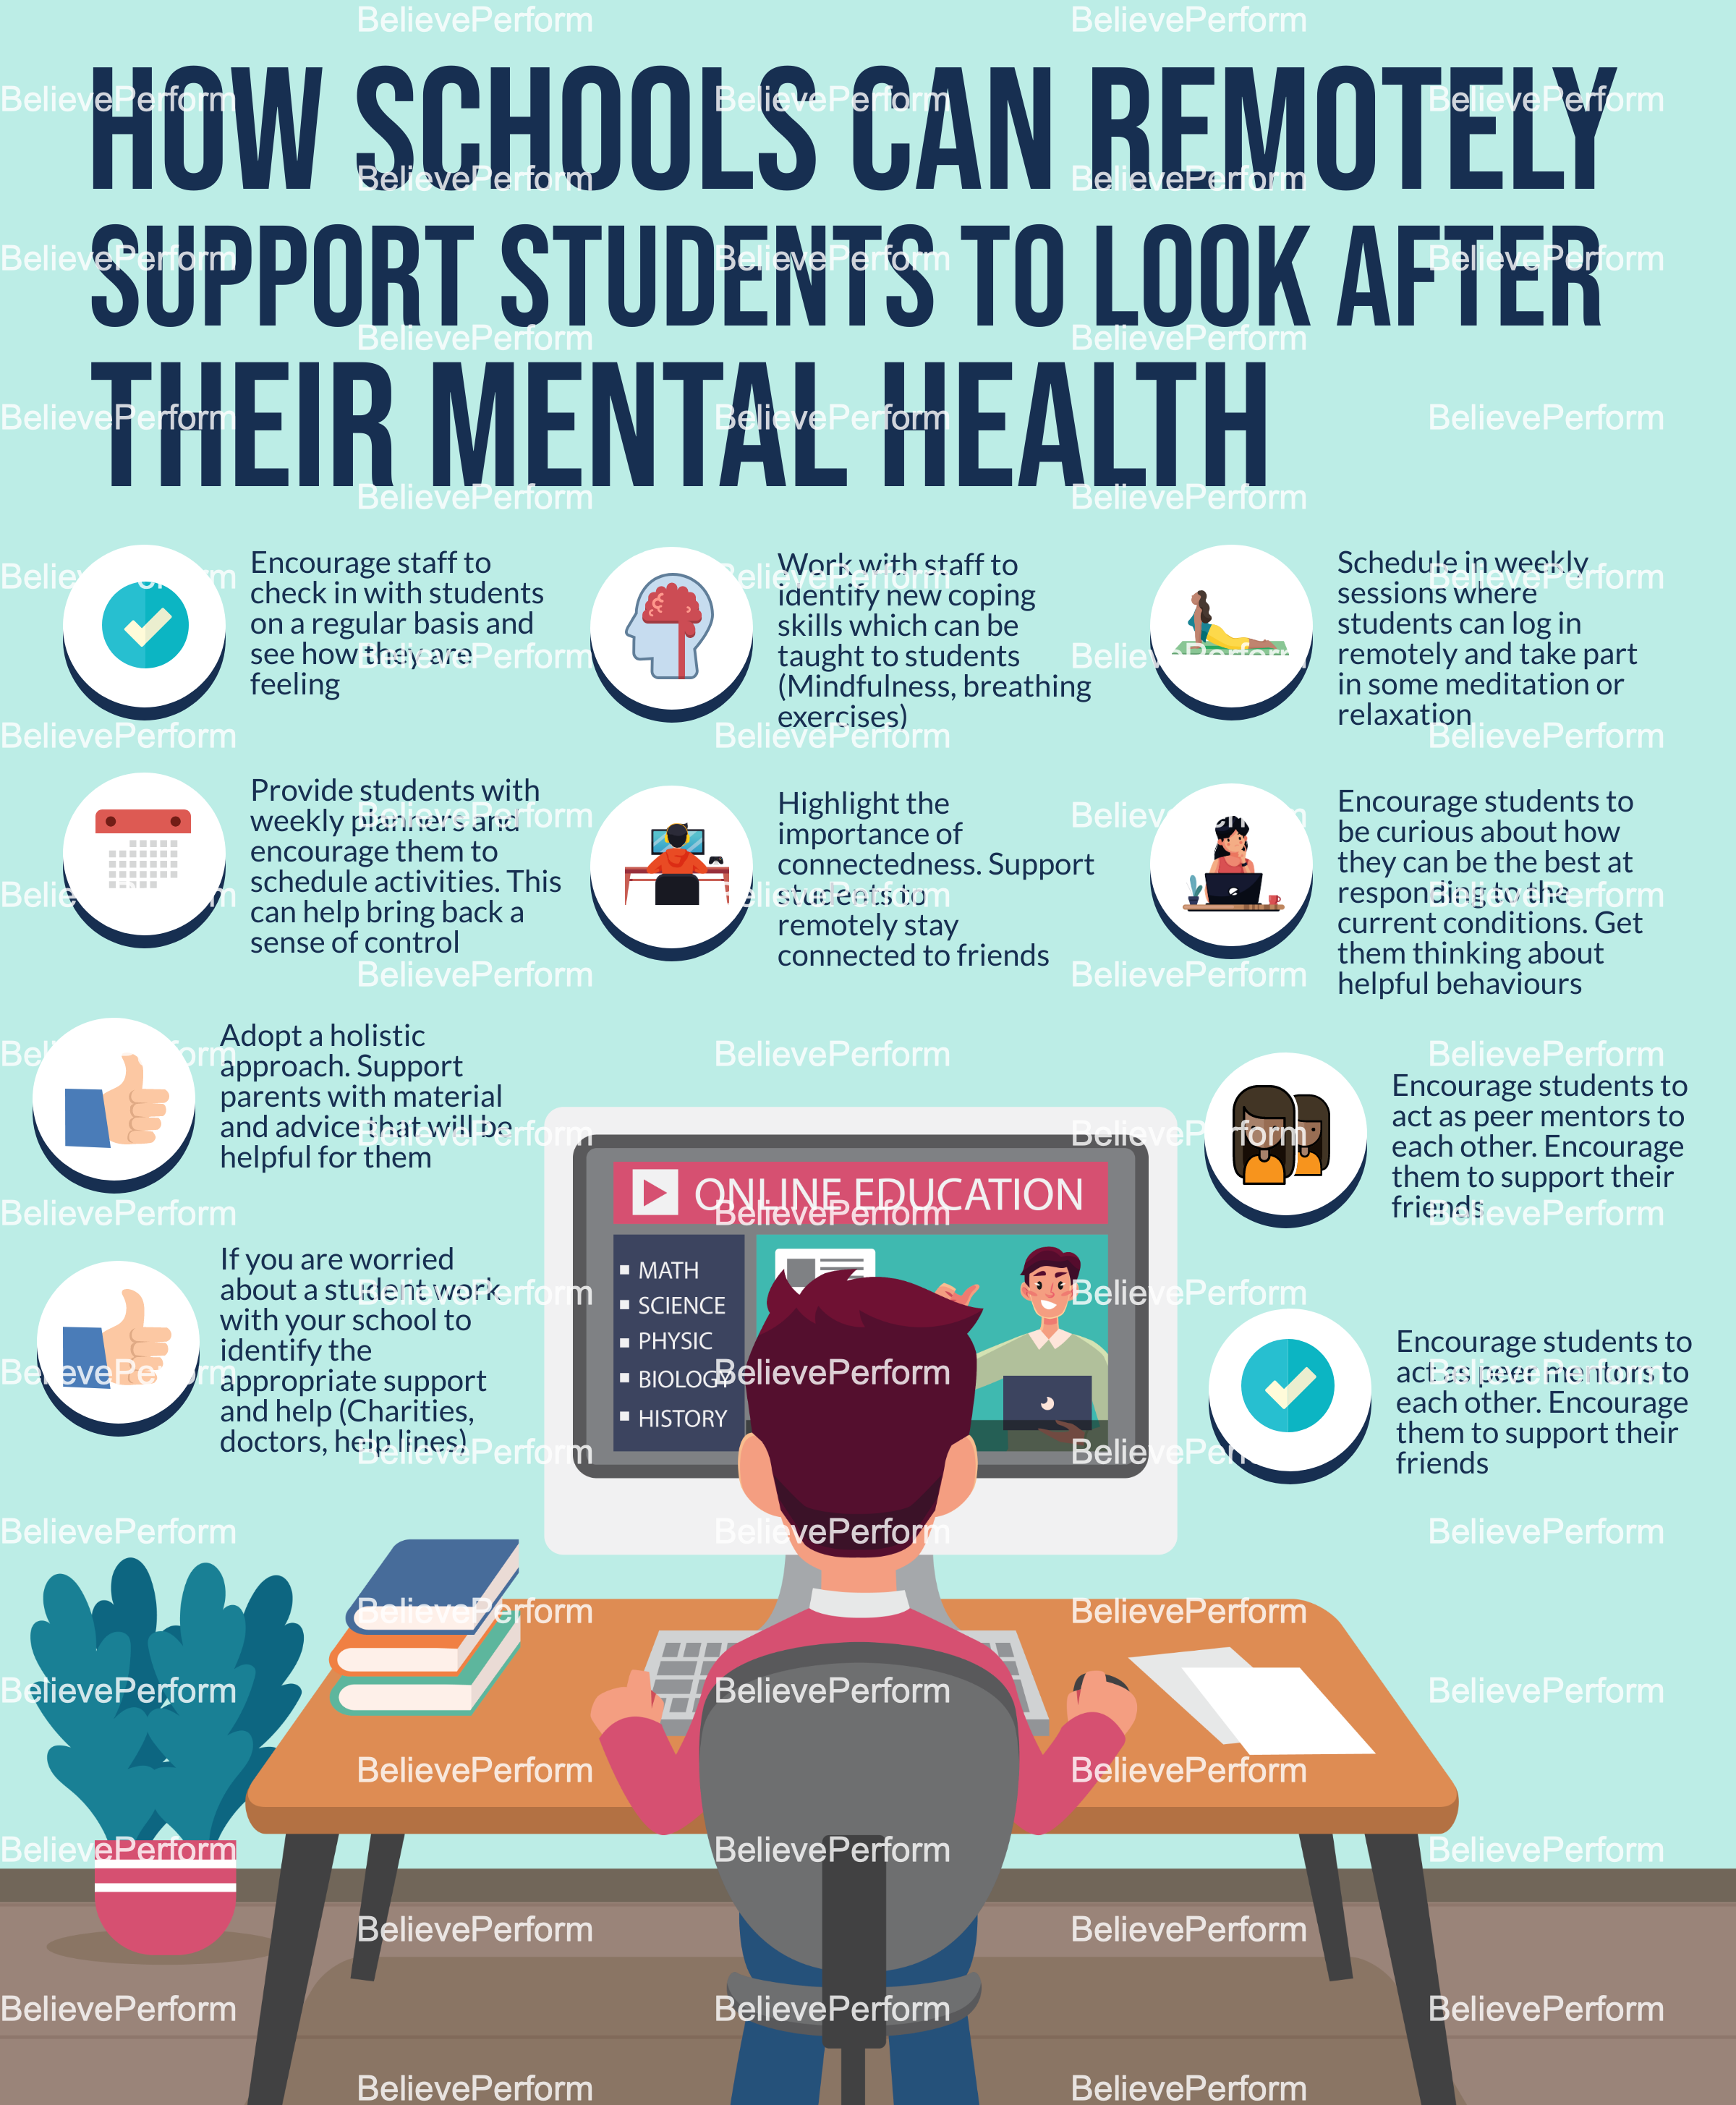 How schools can remotely support students to look after